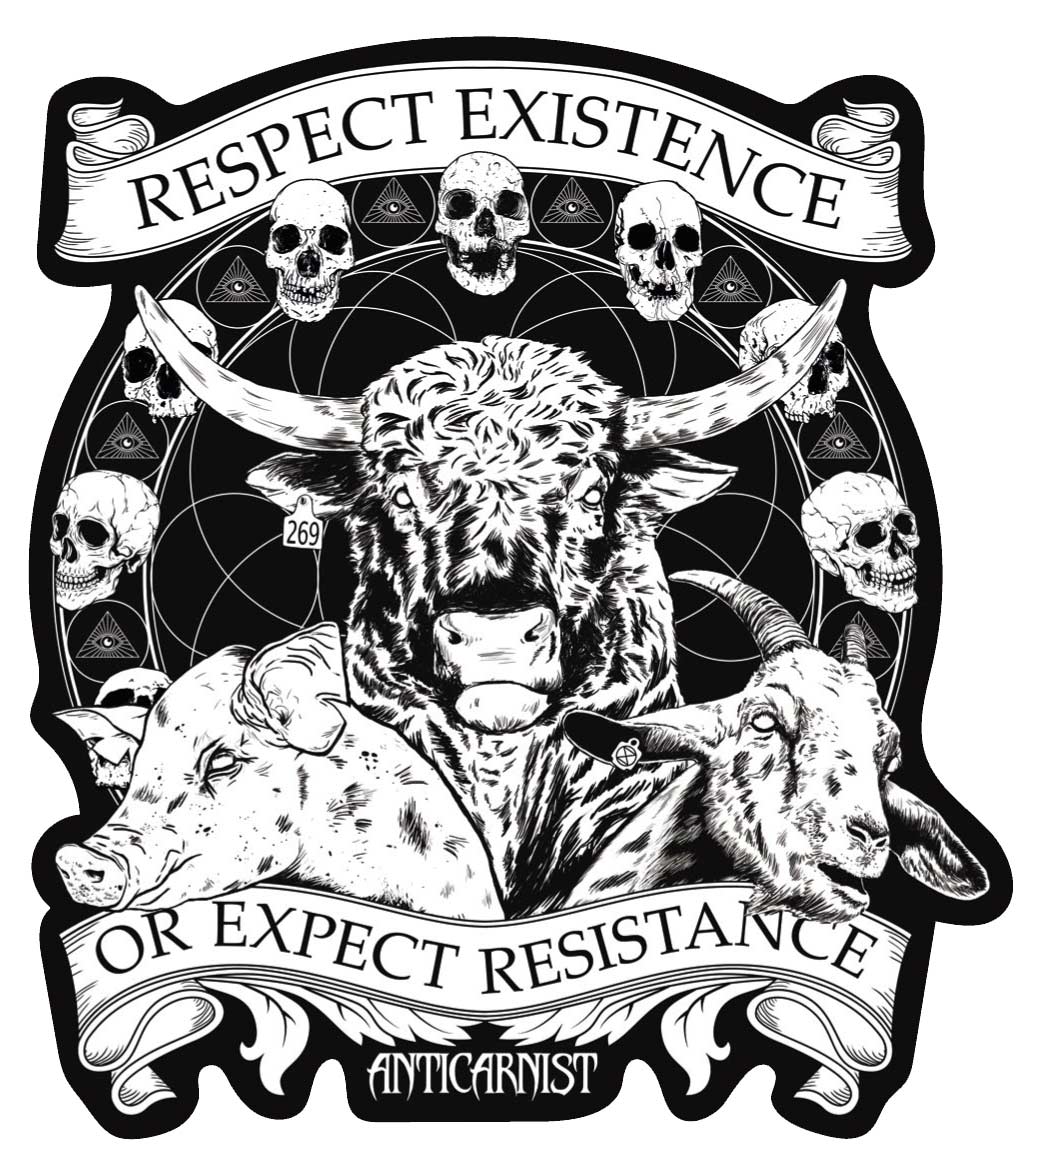 Respect Existence or Expect Resistance Vinyl Sticker